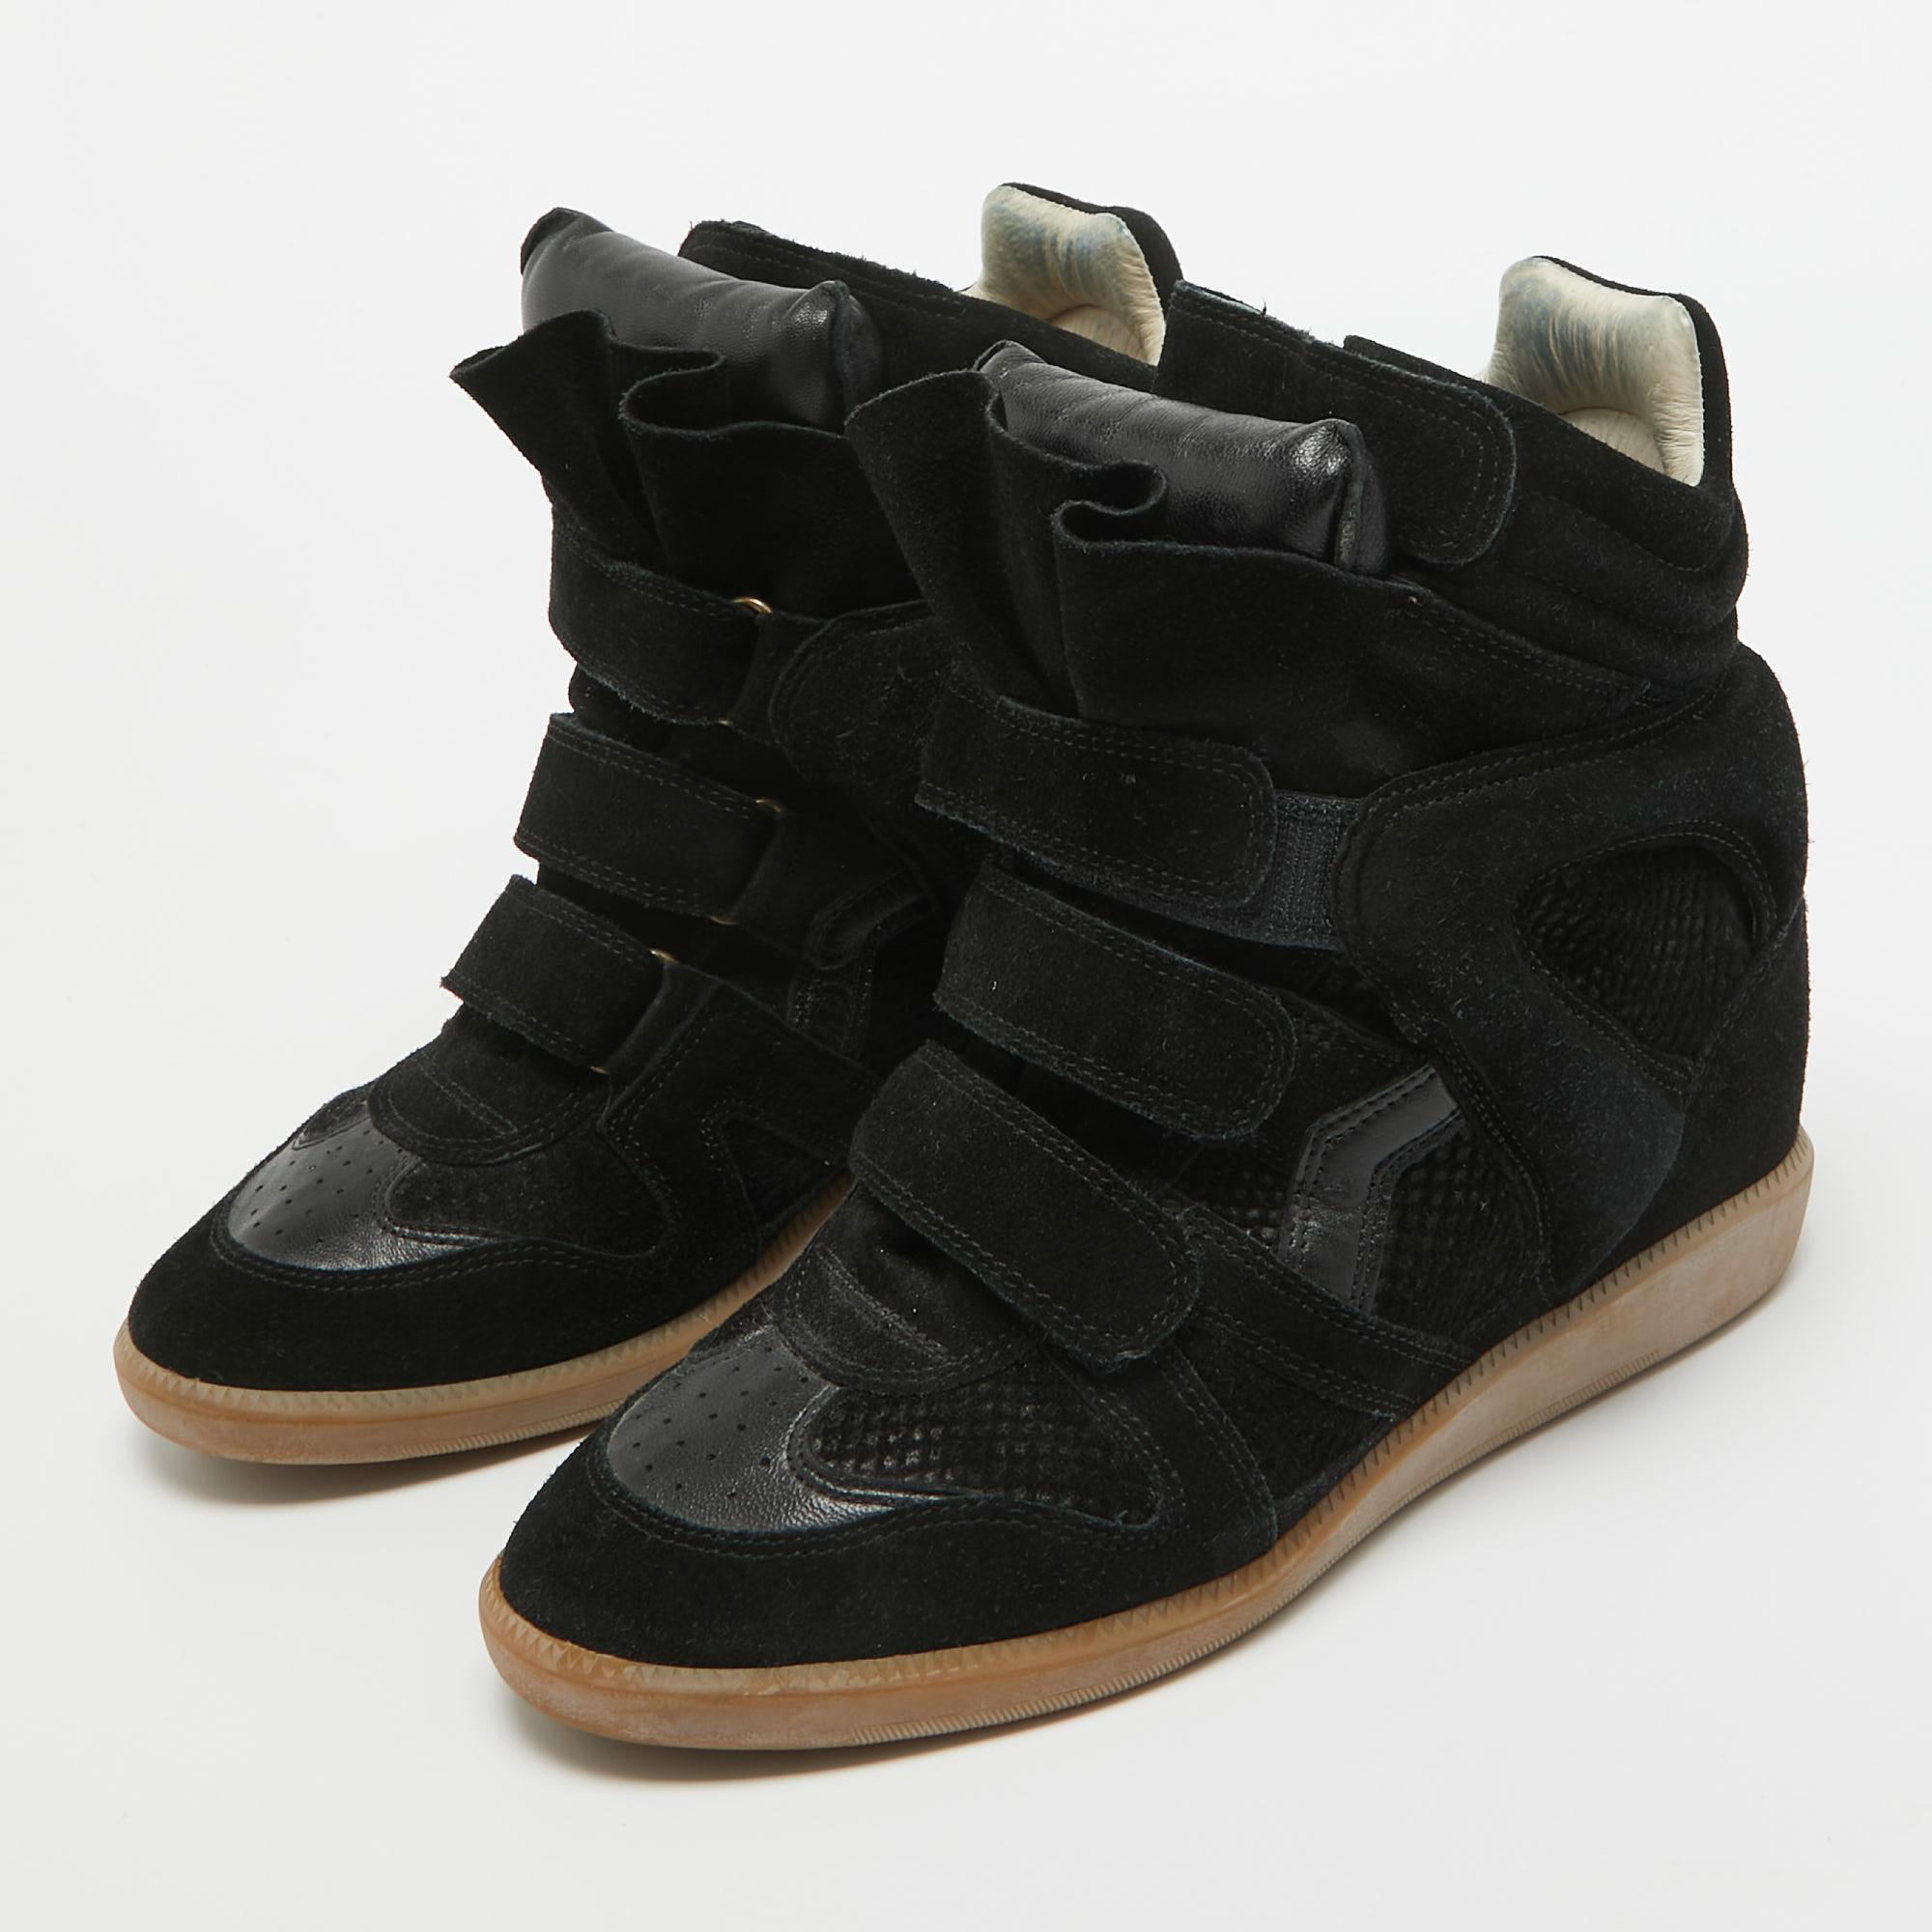 Isabel Marant Black Leather and Suede Over Basket Wedge High Top Sneakers Size 3 en vente 6